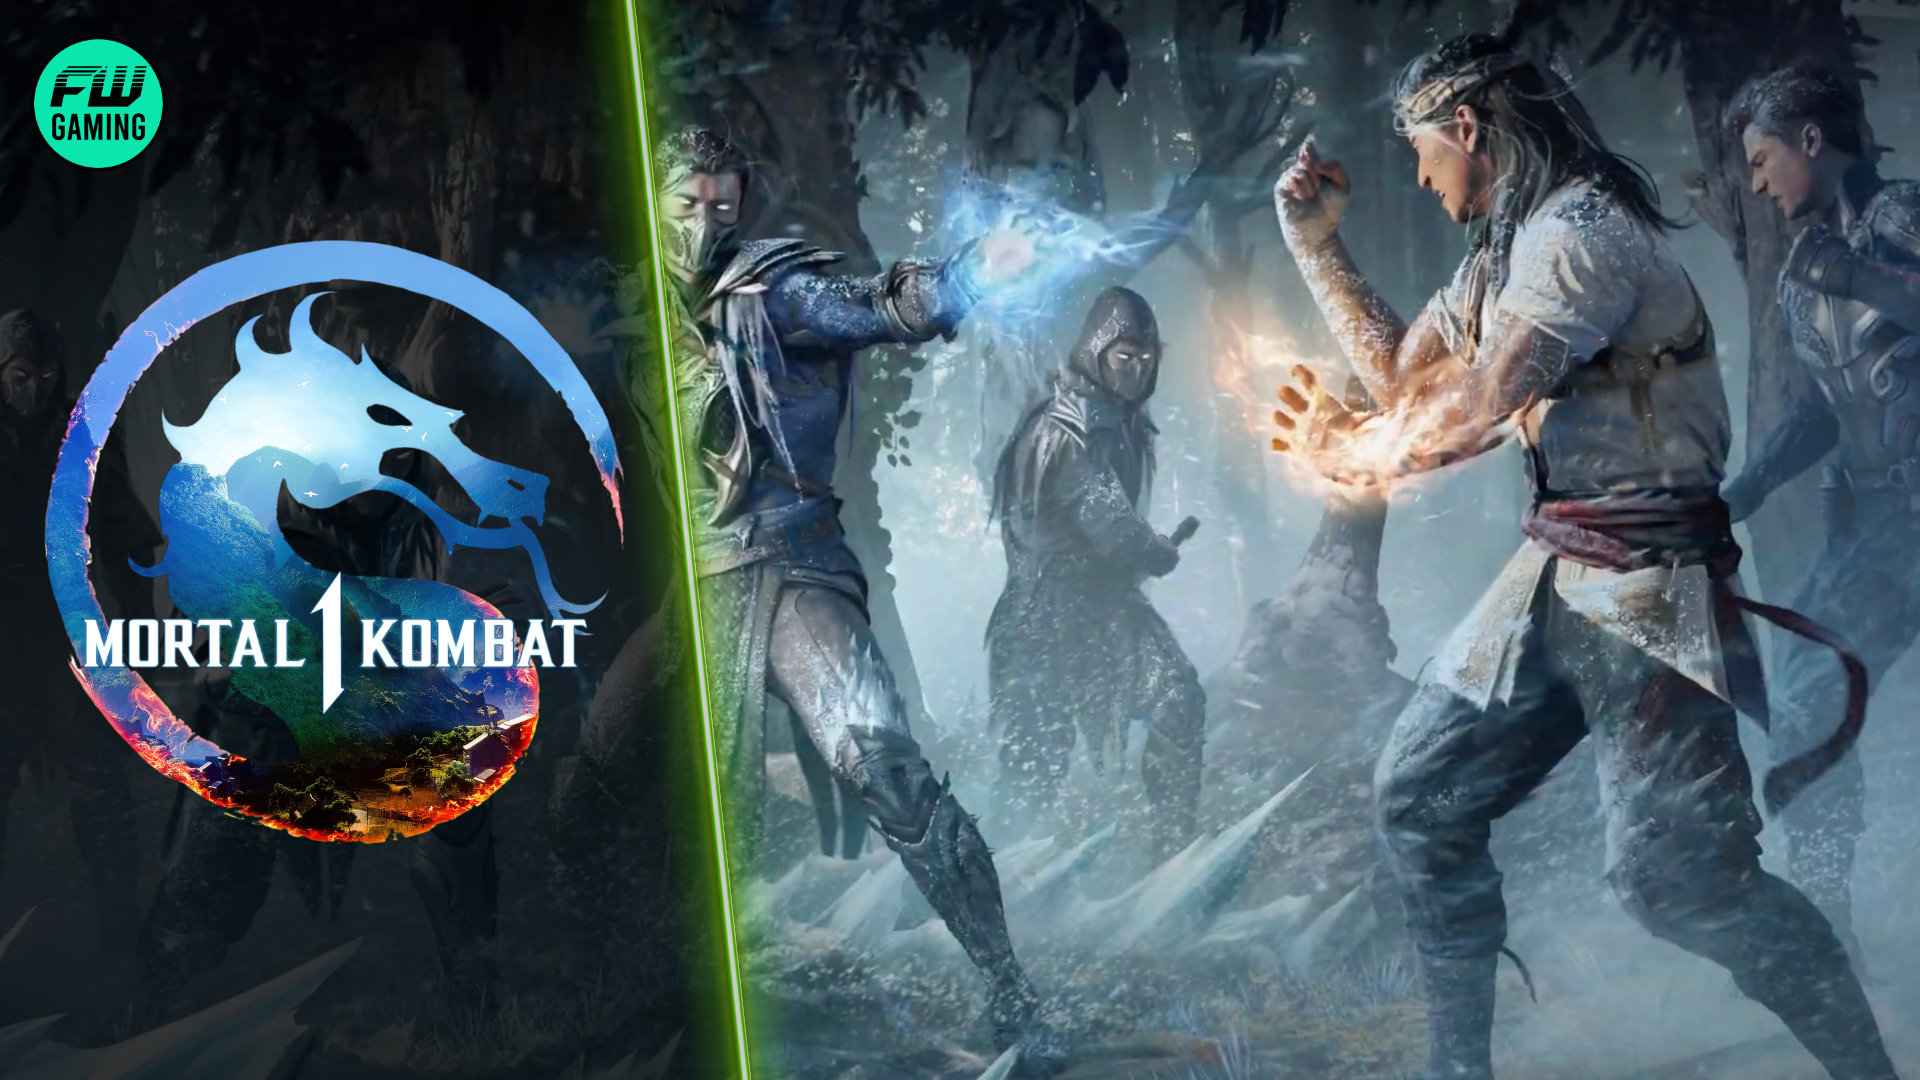 Mortal Kombat 1 Enters Its Coolest Invasions Season With New Trailer